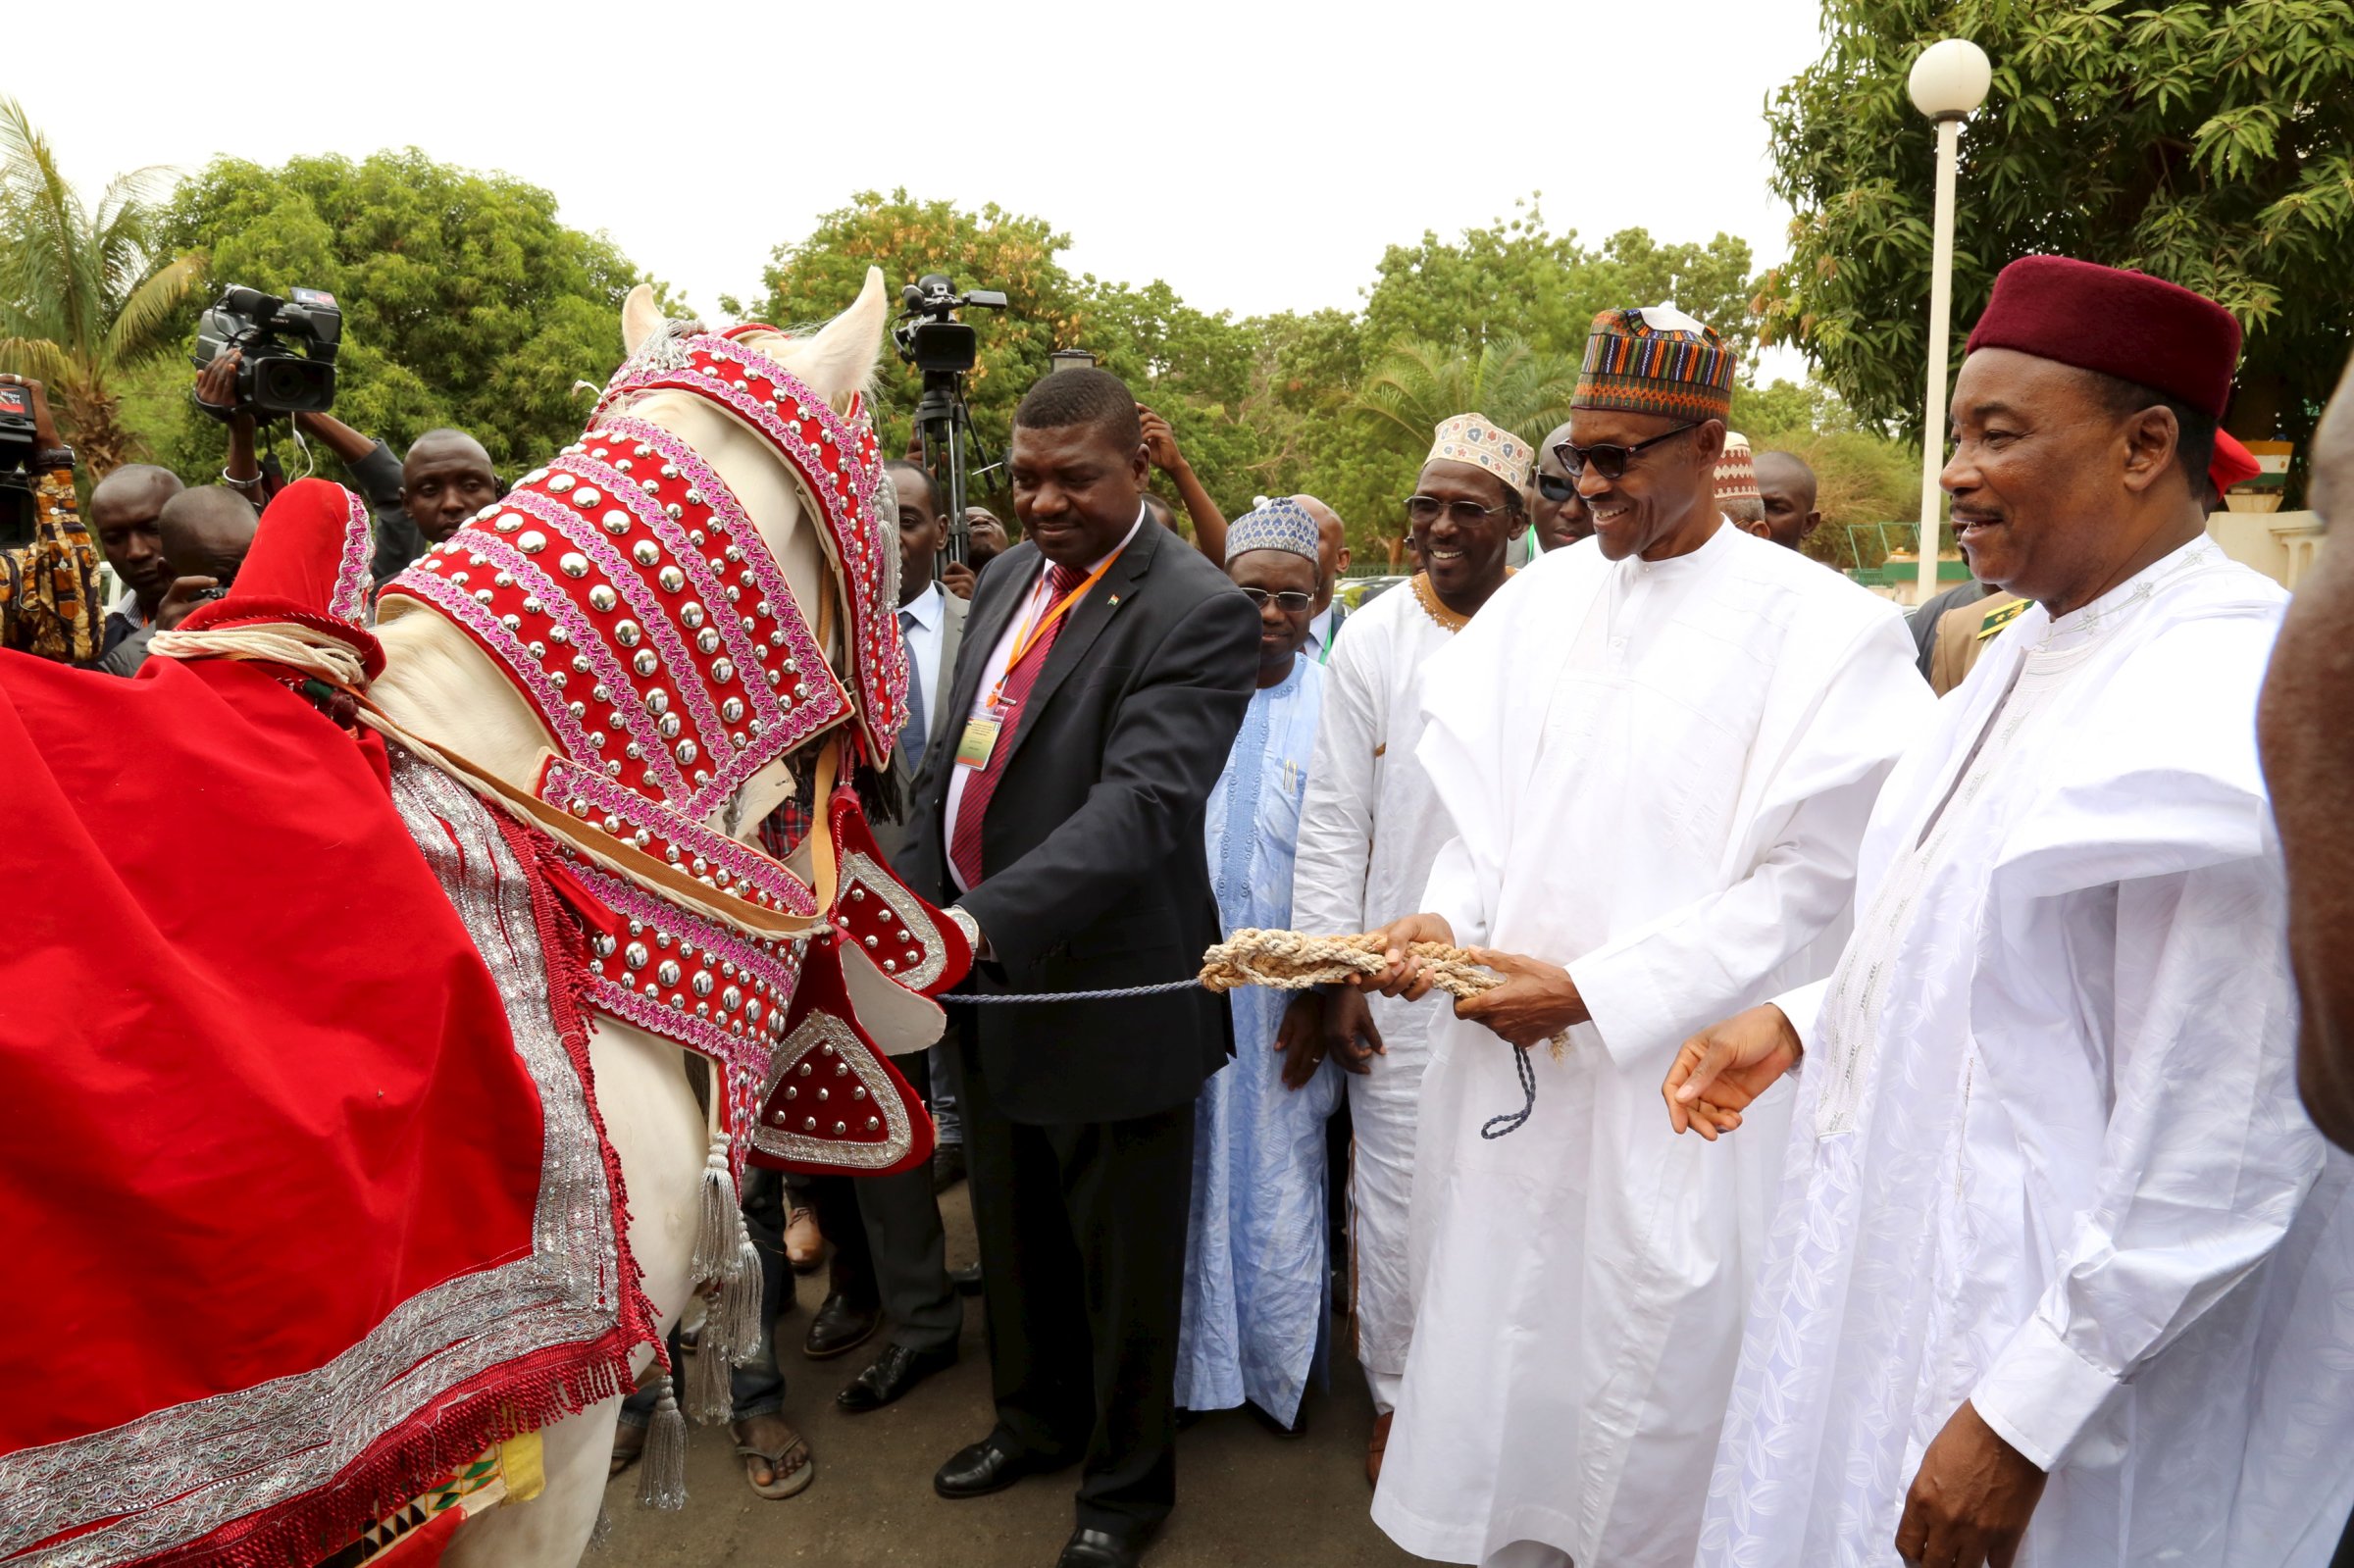 Niger's President Mahamadou Issoufou  and Nigerian President Muhammadu Buhari observe a horse wearing a ceremonial outfit in Niamey